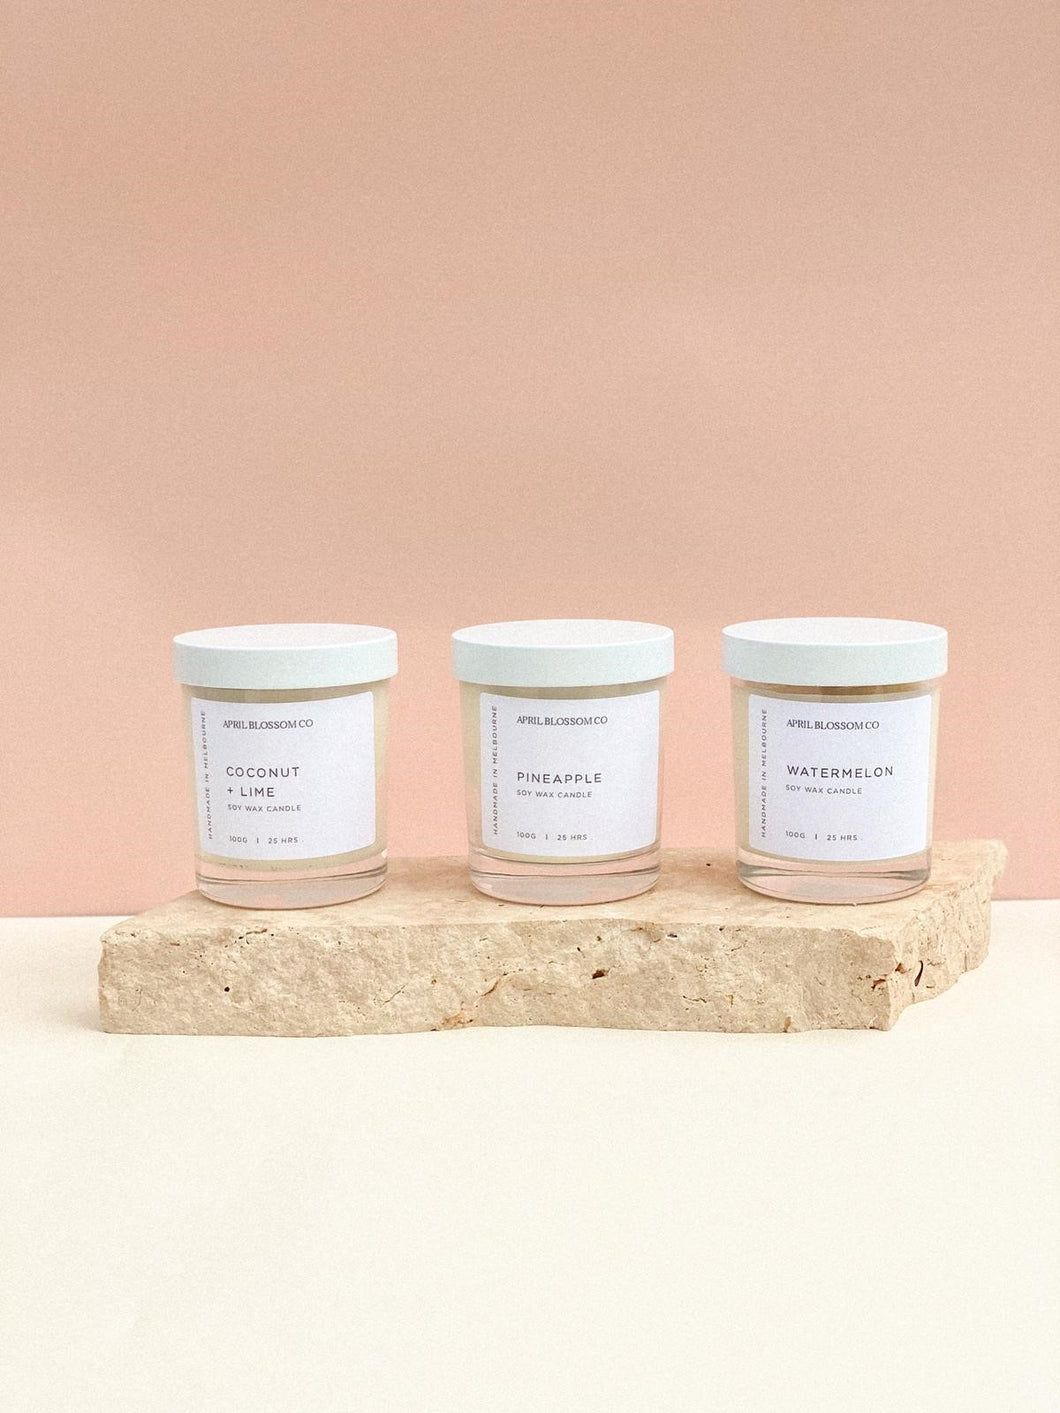 Trio Candle Pack